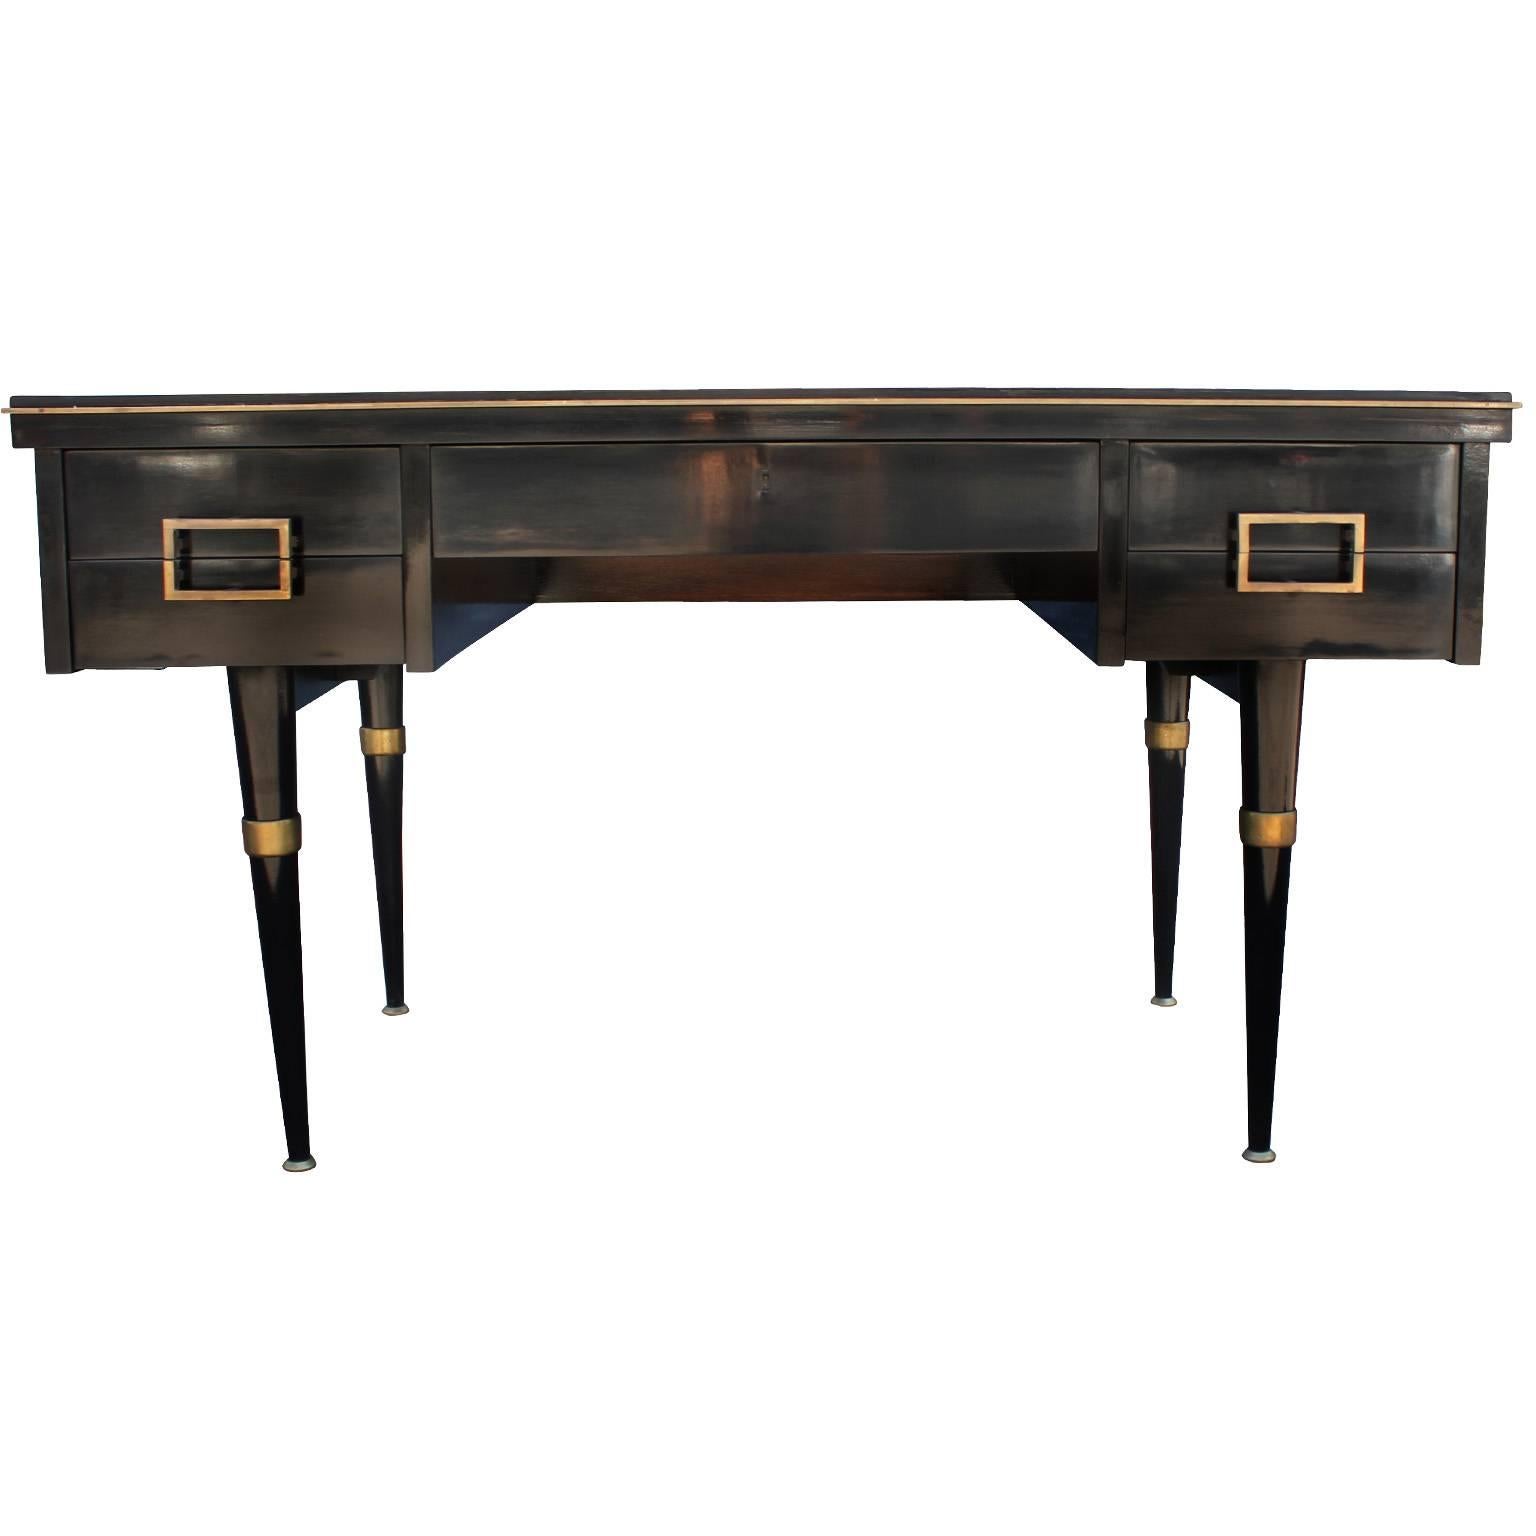 Dramatic Argentinean executive desk in glossy black lacquer. Desk is accented in brass hardware. Top has a jade green writing surface trimmed in gold. Blonde burl wood inset on the back of desk adds visual interest. Five drawers provide storage.